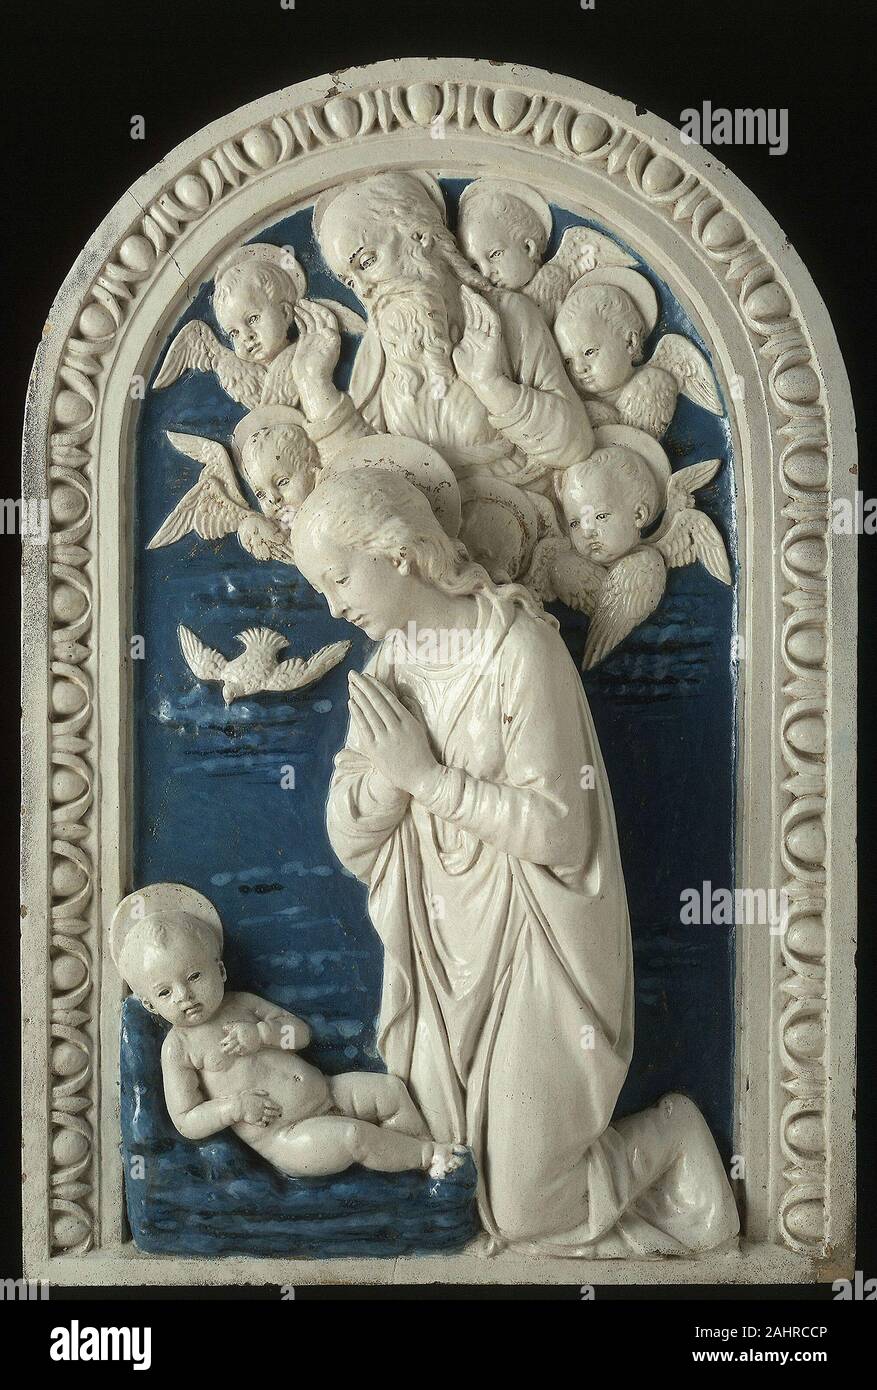 Workshop of Andrea della Robbia. Adoration of the Christ Child. 1479–1525. Italy. Terracotta and polychrome Stock Photo